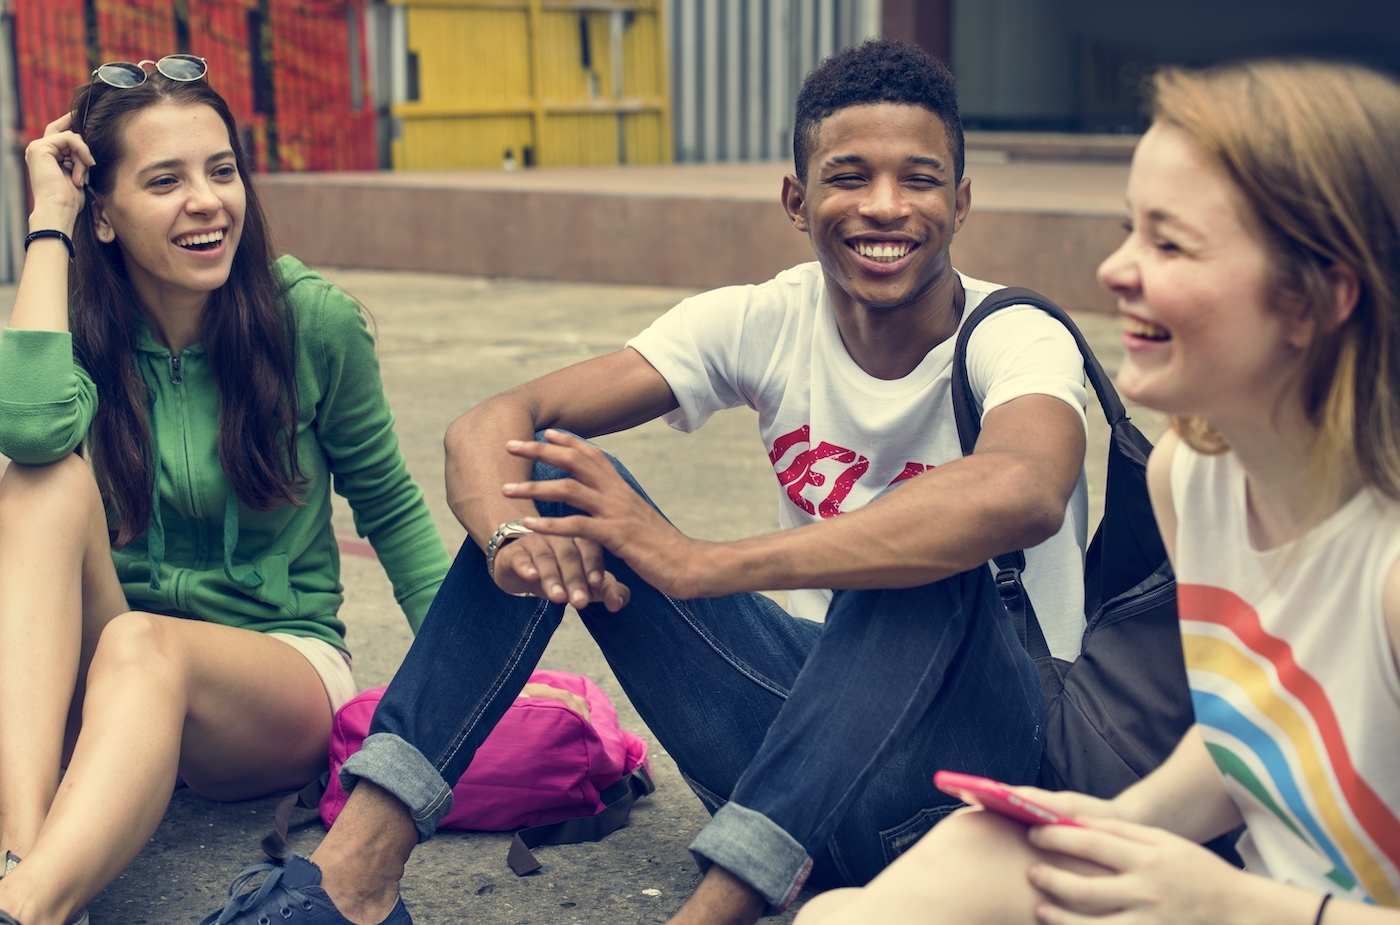 Three teenagers sitting and talking while smiling